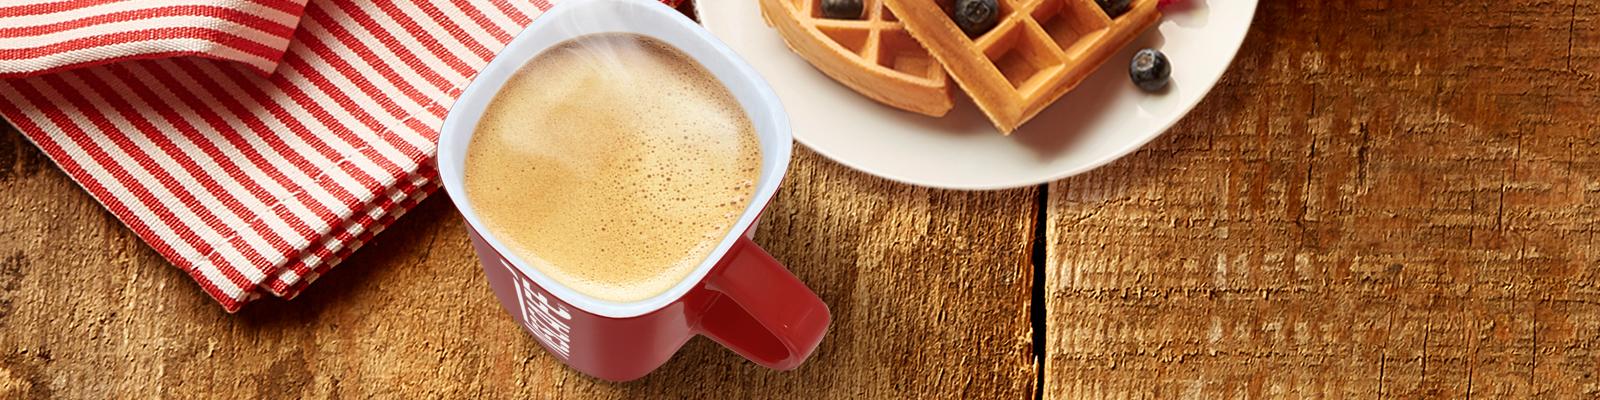 SEVEN THINGS TO PUT IN YOUR COFFEE, NESCAFE